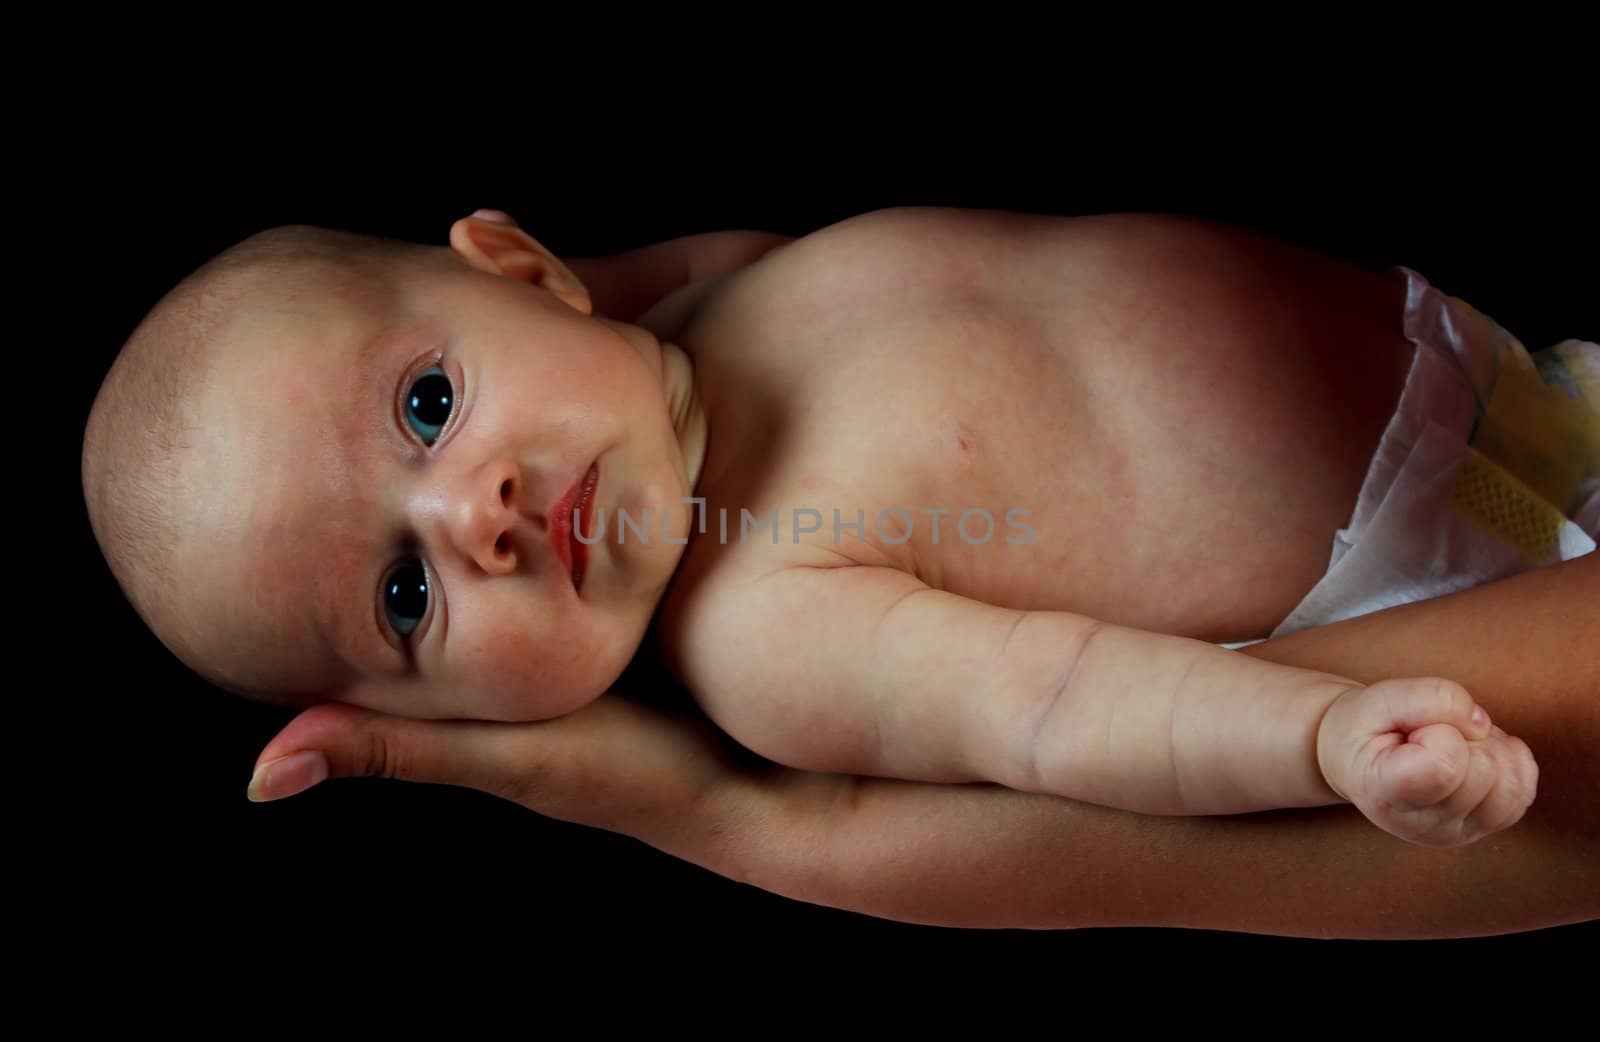 infant on the hands, on a black background.